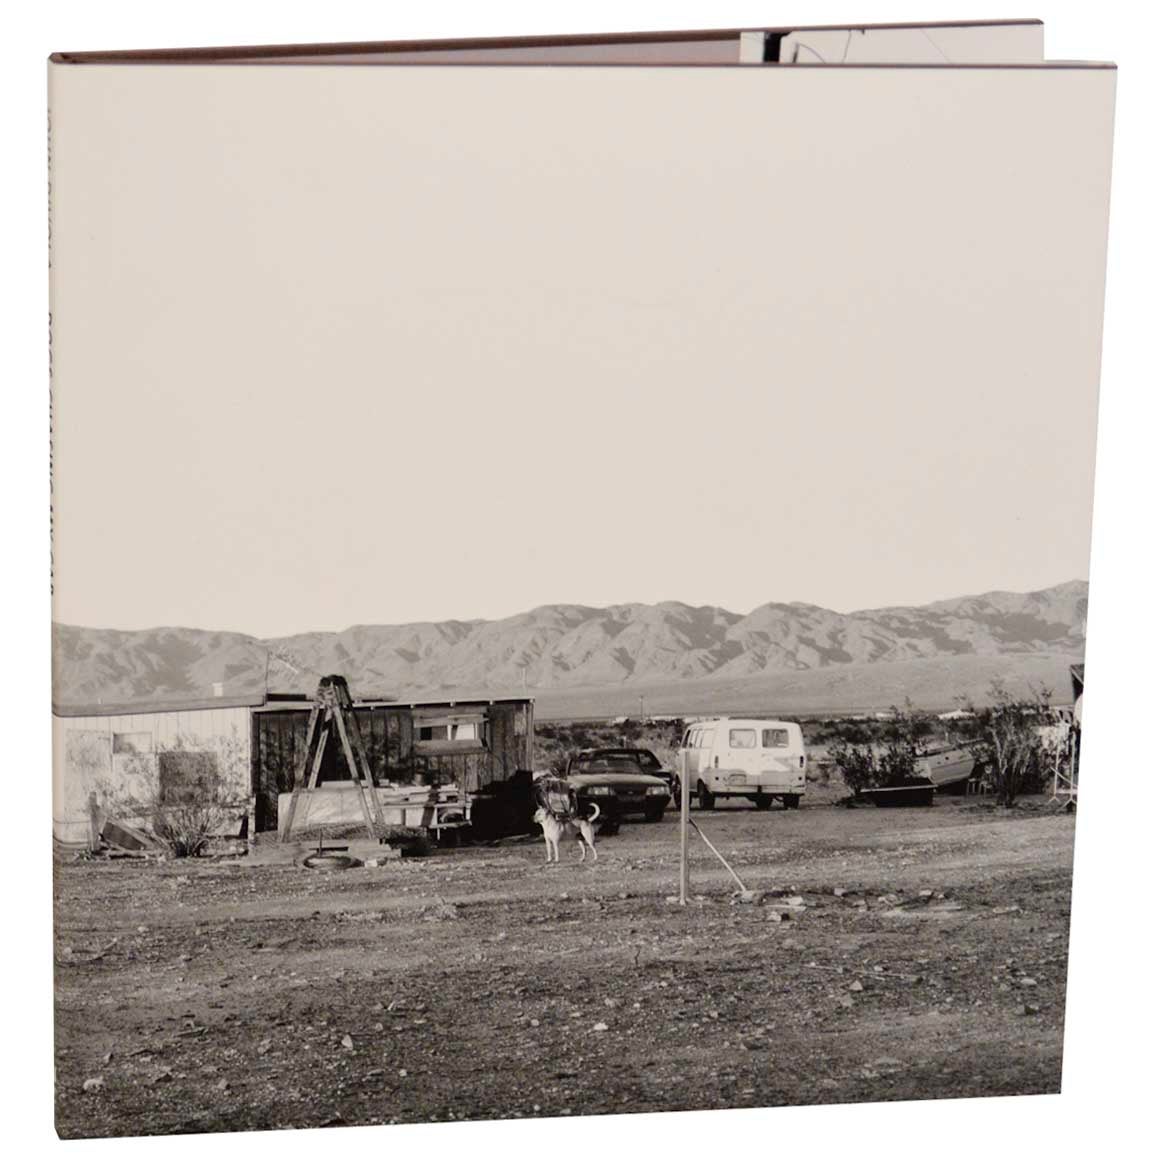 Dogs Chasing My Car in the Desert by John DIVOLA on Jeff Hirsch Books